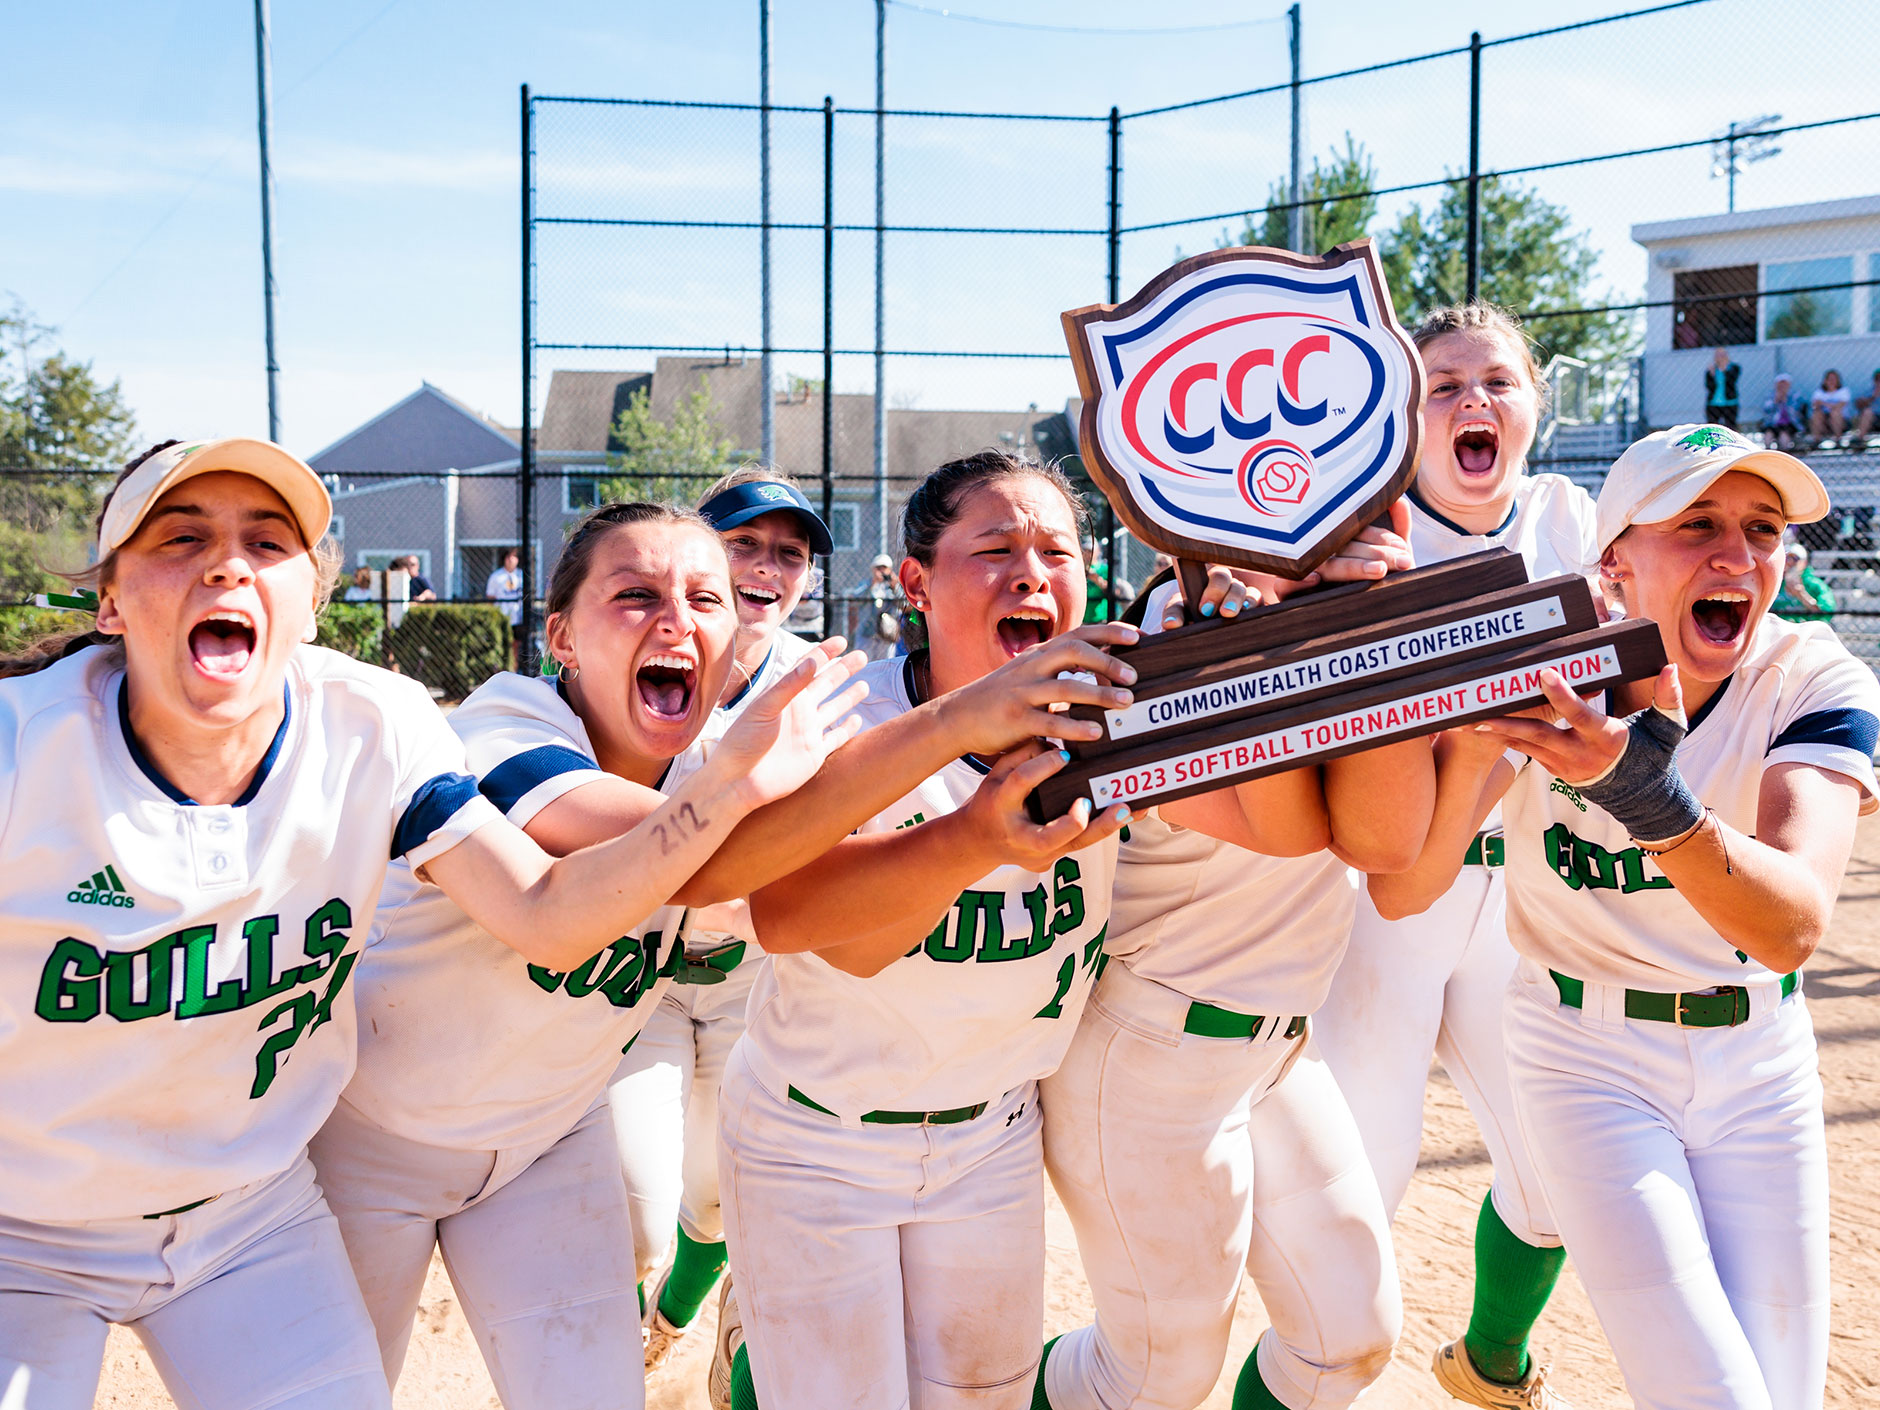 Endicott’s softball program swept Western New England, 11-3 and 8-0 (both in six innings), to secure its fourth consecutive CCC Championship under the guidance of head coach Katie Bettencourt.